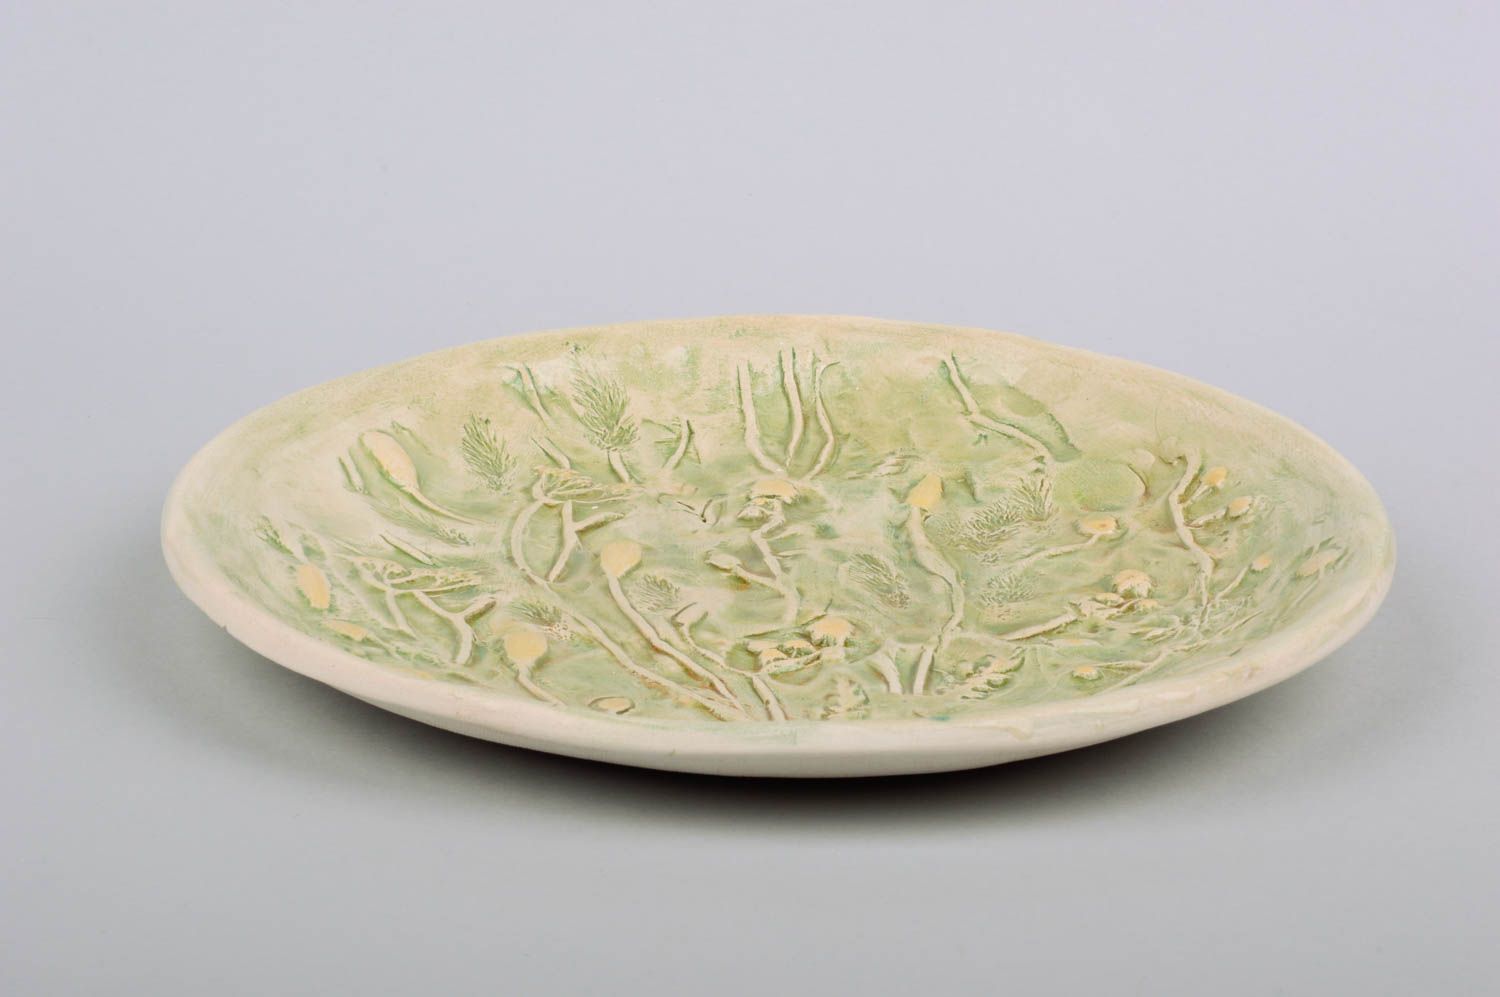 Handcrafted ceramic plate designer clay plate decorative tableware gift ideas photo 2